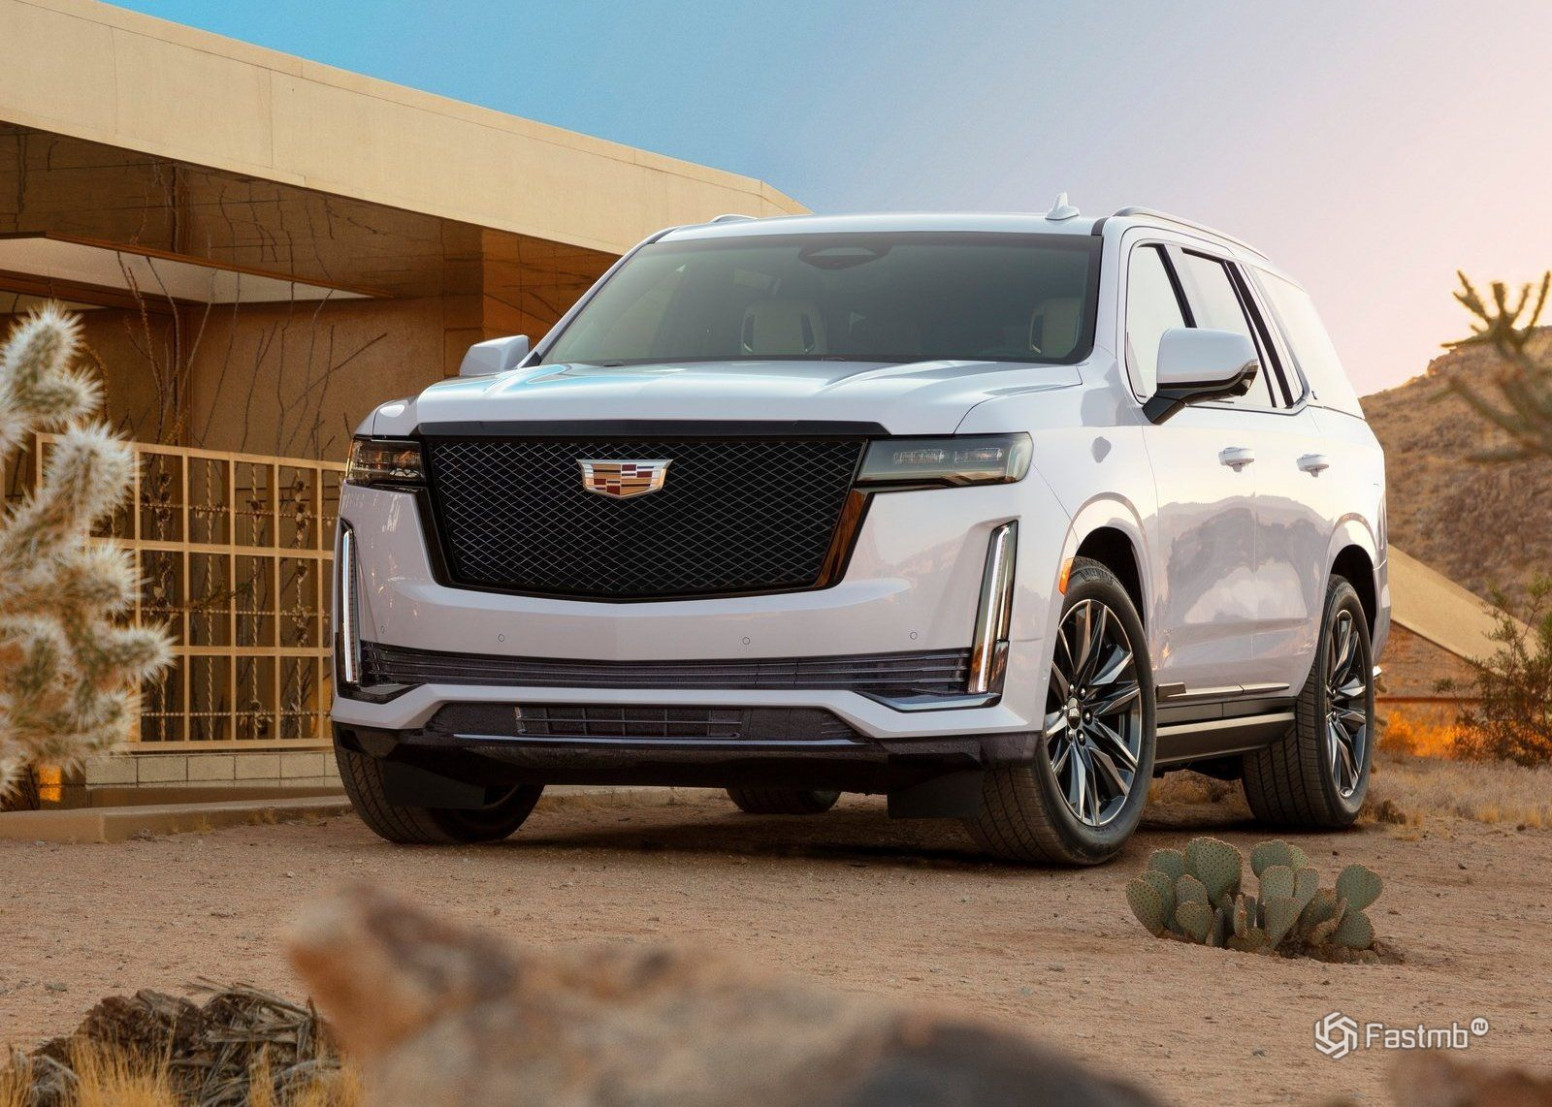 Redesign And Review 2022 Cadillac Escalade Luxury Suv